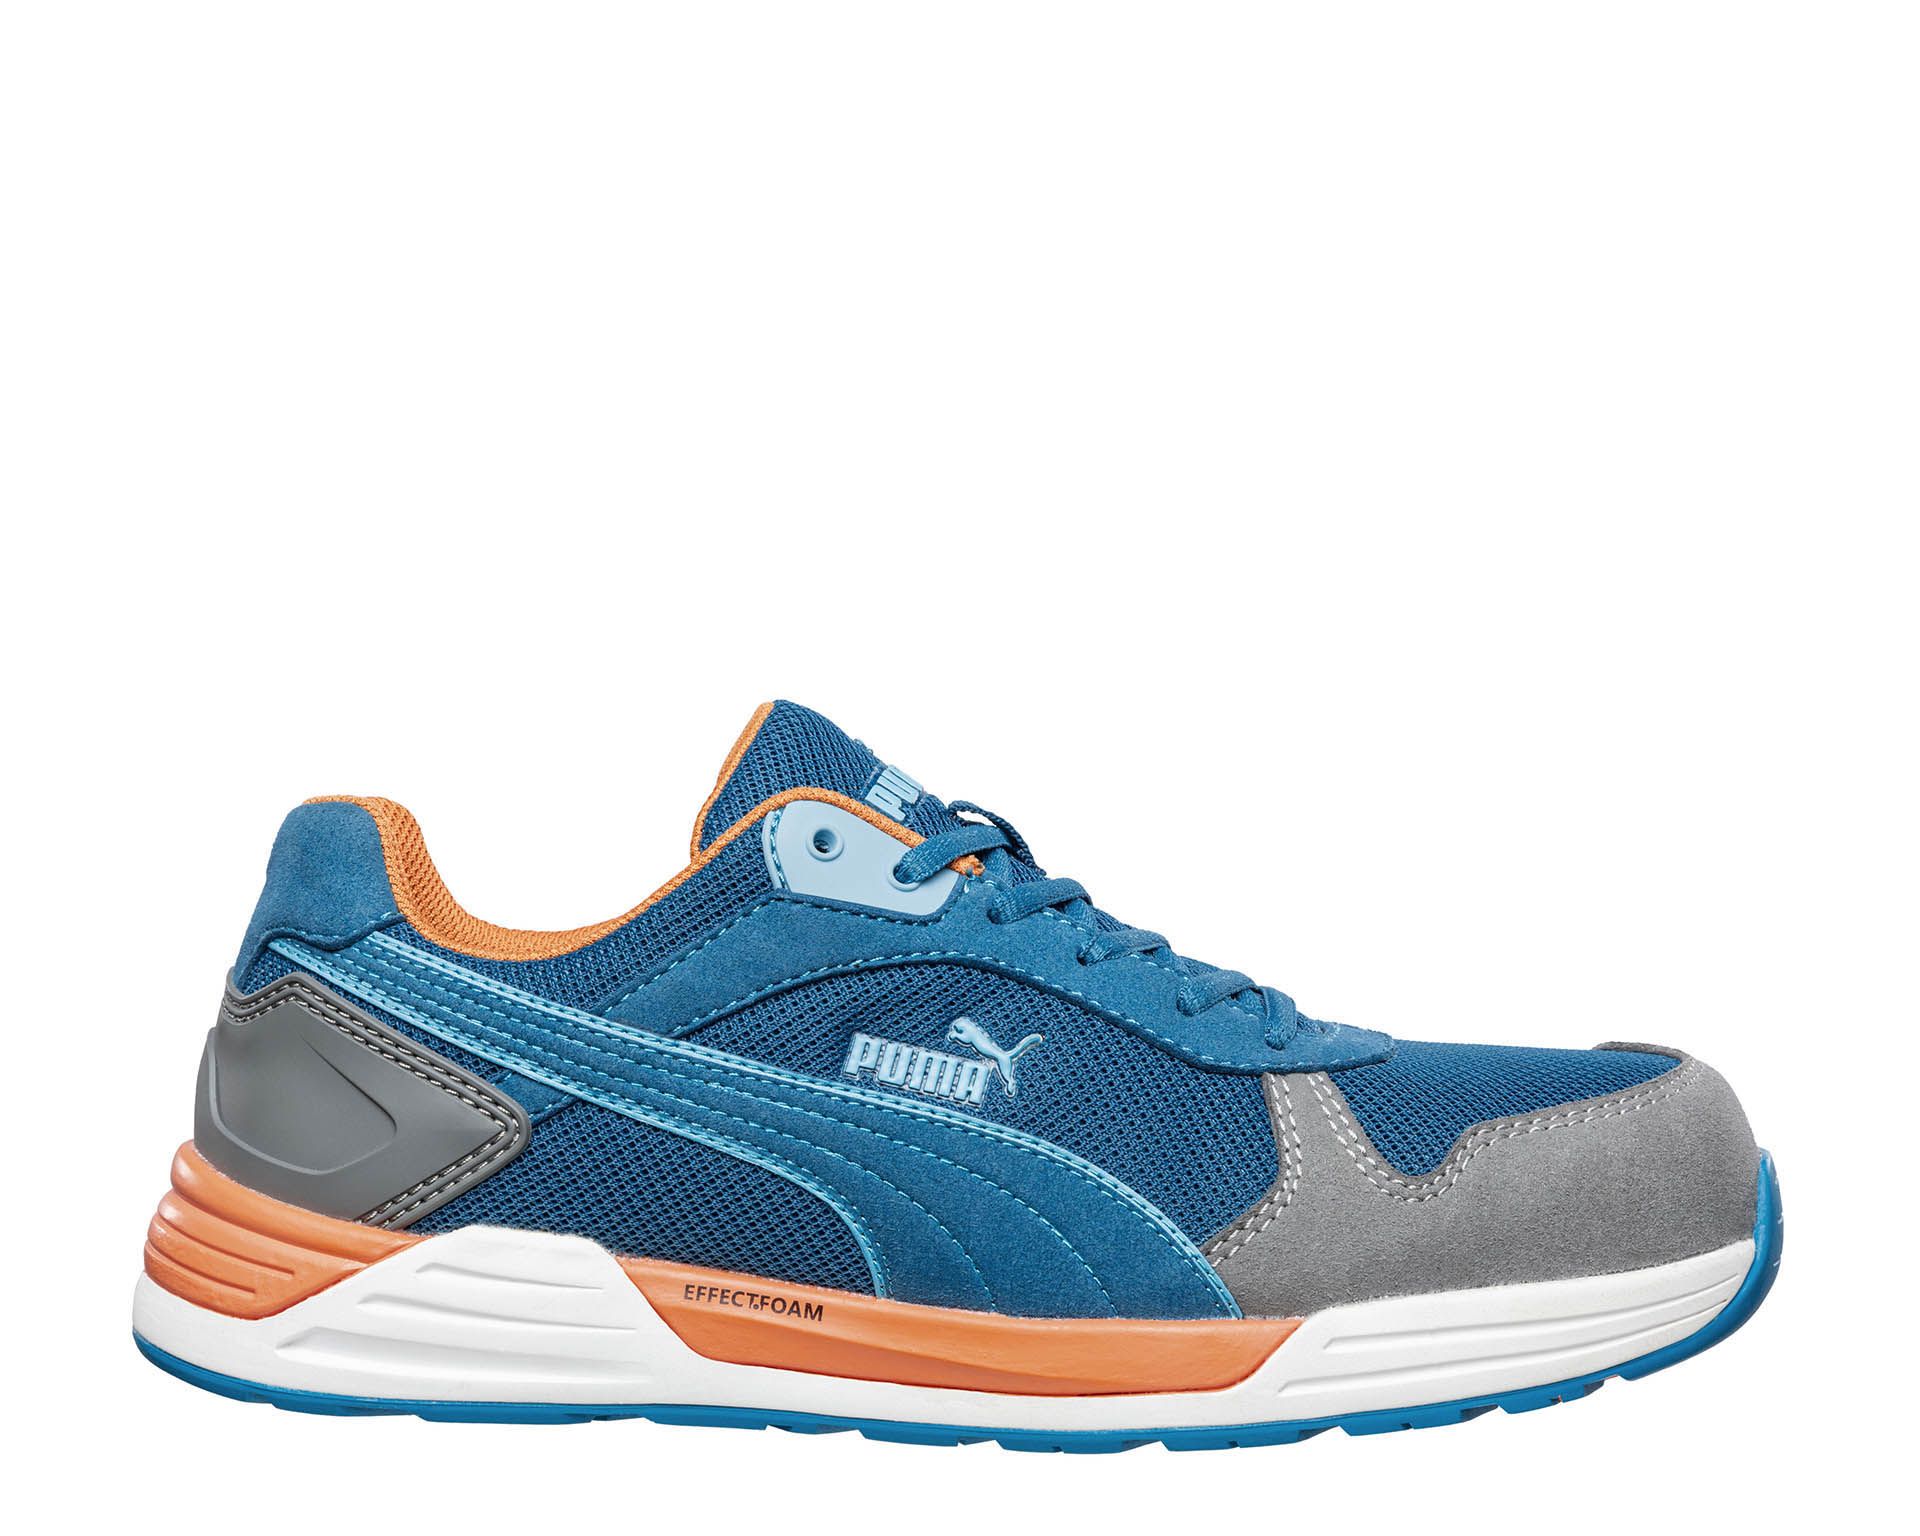 PUMA SAFETY safety ESD English LOW | FRONTSIDE SRC HRO S1P Puma shoes Safety